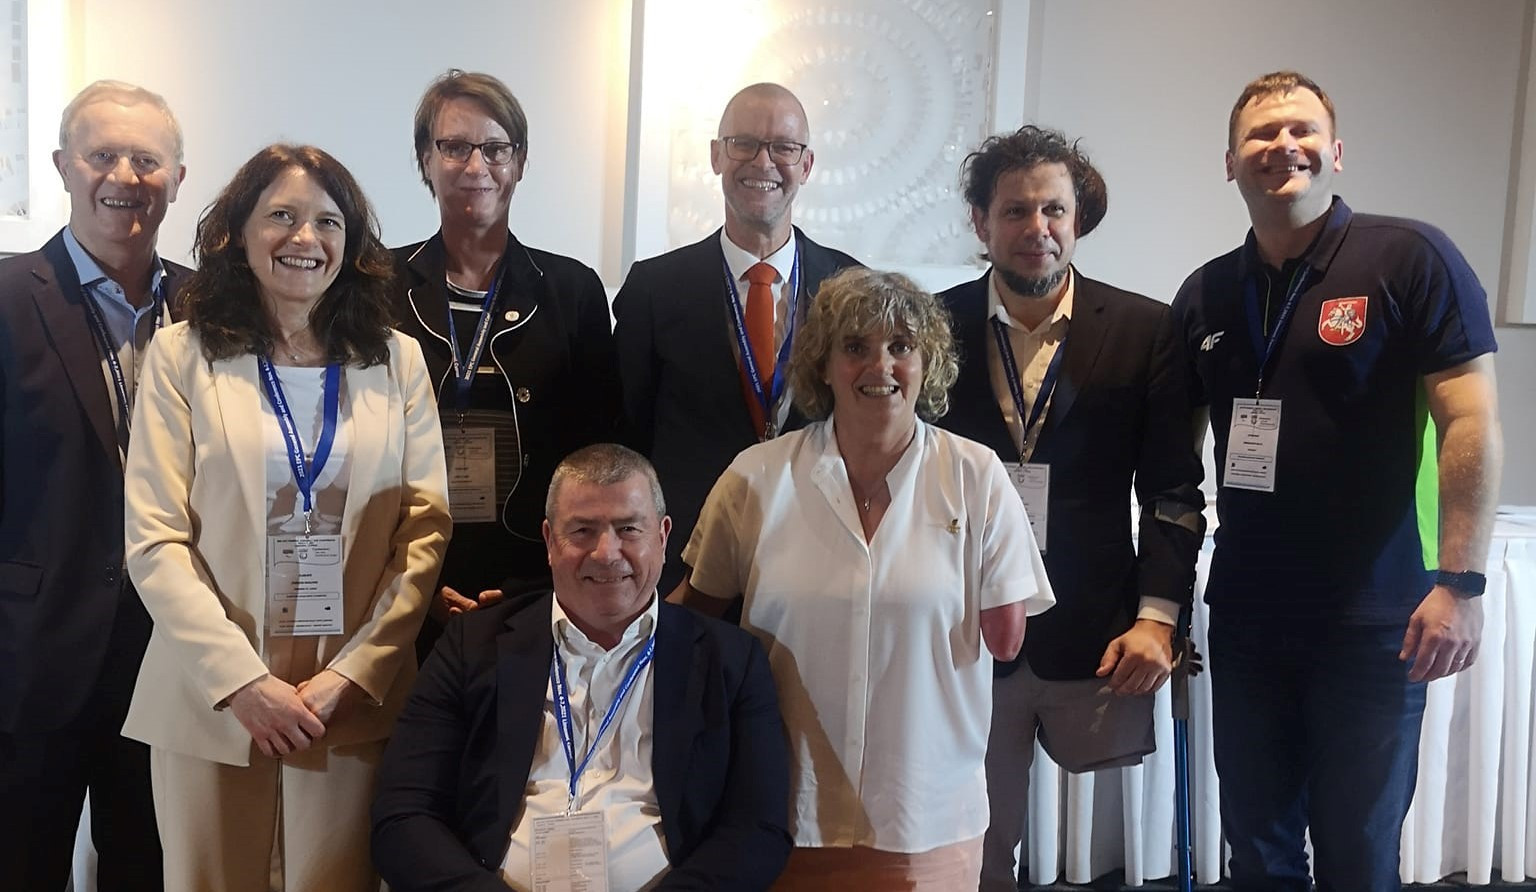 Raymond Blondel, back row, centre, has been elected as President of the European Paralympic Committee, with a new Executive Committee also elected ©Facebook/European Paralympic Committee